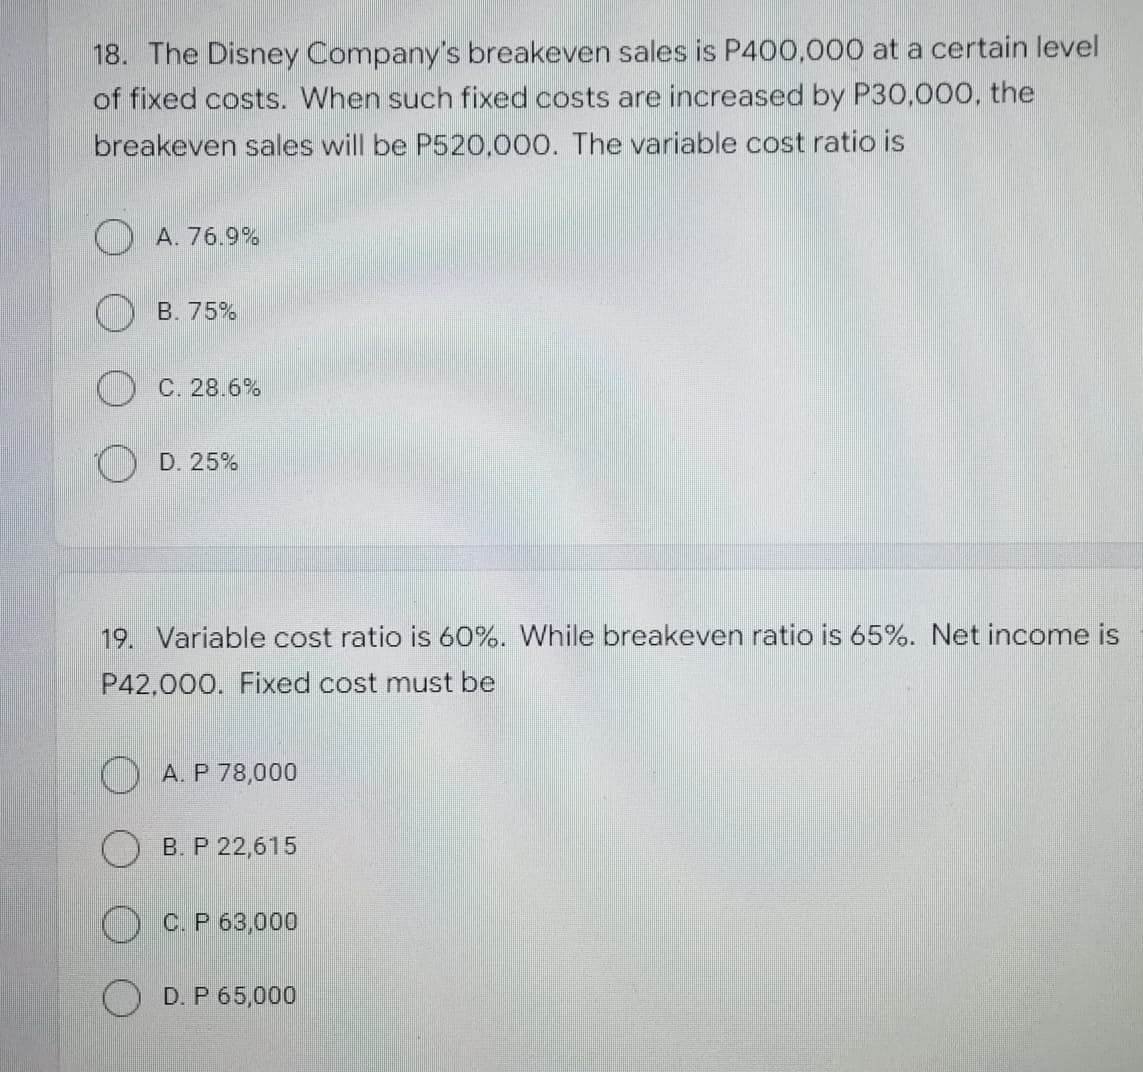 18. The Disney Company's breakeven sales is P400,000 at a certain level
of fixed costs. When such fixed costs are increased by P30,000, the
breakeven sales will be P520,000. The variable cost ratio is
A. 76.9%
B. 75%
C. 28.6%
D. 25%
19. Variable cost ratio is 60%. While breakeven ratio is 65%. Net income is
P42,000. Fixed cost must be
A. P 78,000
B. P 22,615
C. P 63,000
OD. P 65,000